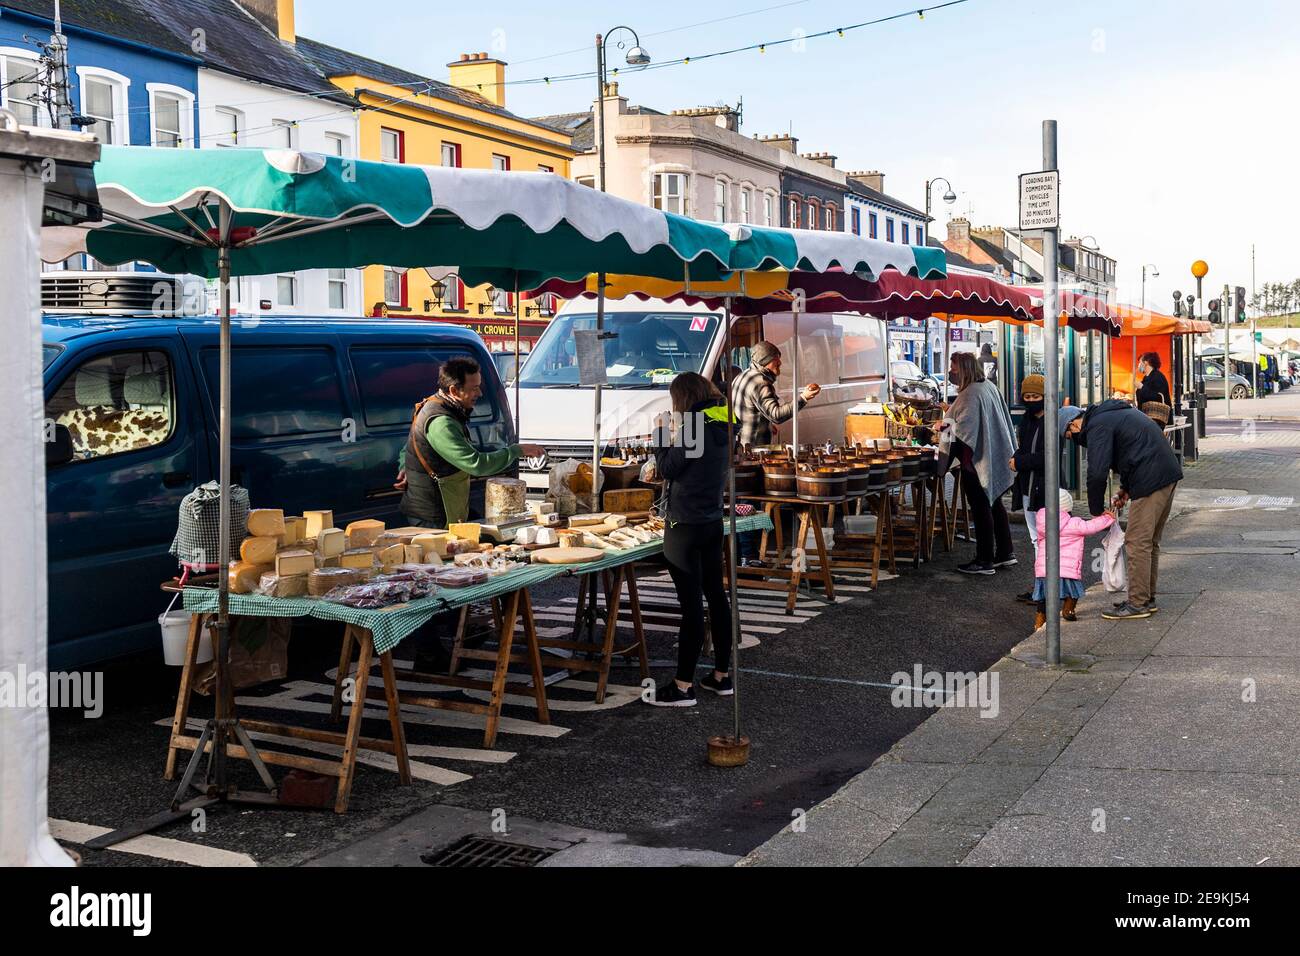 Bantry, West Cork, Ireland. 5th Feb, 2021. Despite level 5 lockdown restrictions, Bantry Friday Market was busy today with traders and customers alike. Although many people wore face masks, a good number didn't. Credit: AG News/Alamy Live News Stock Photo